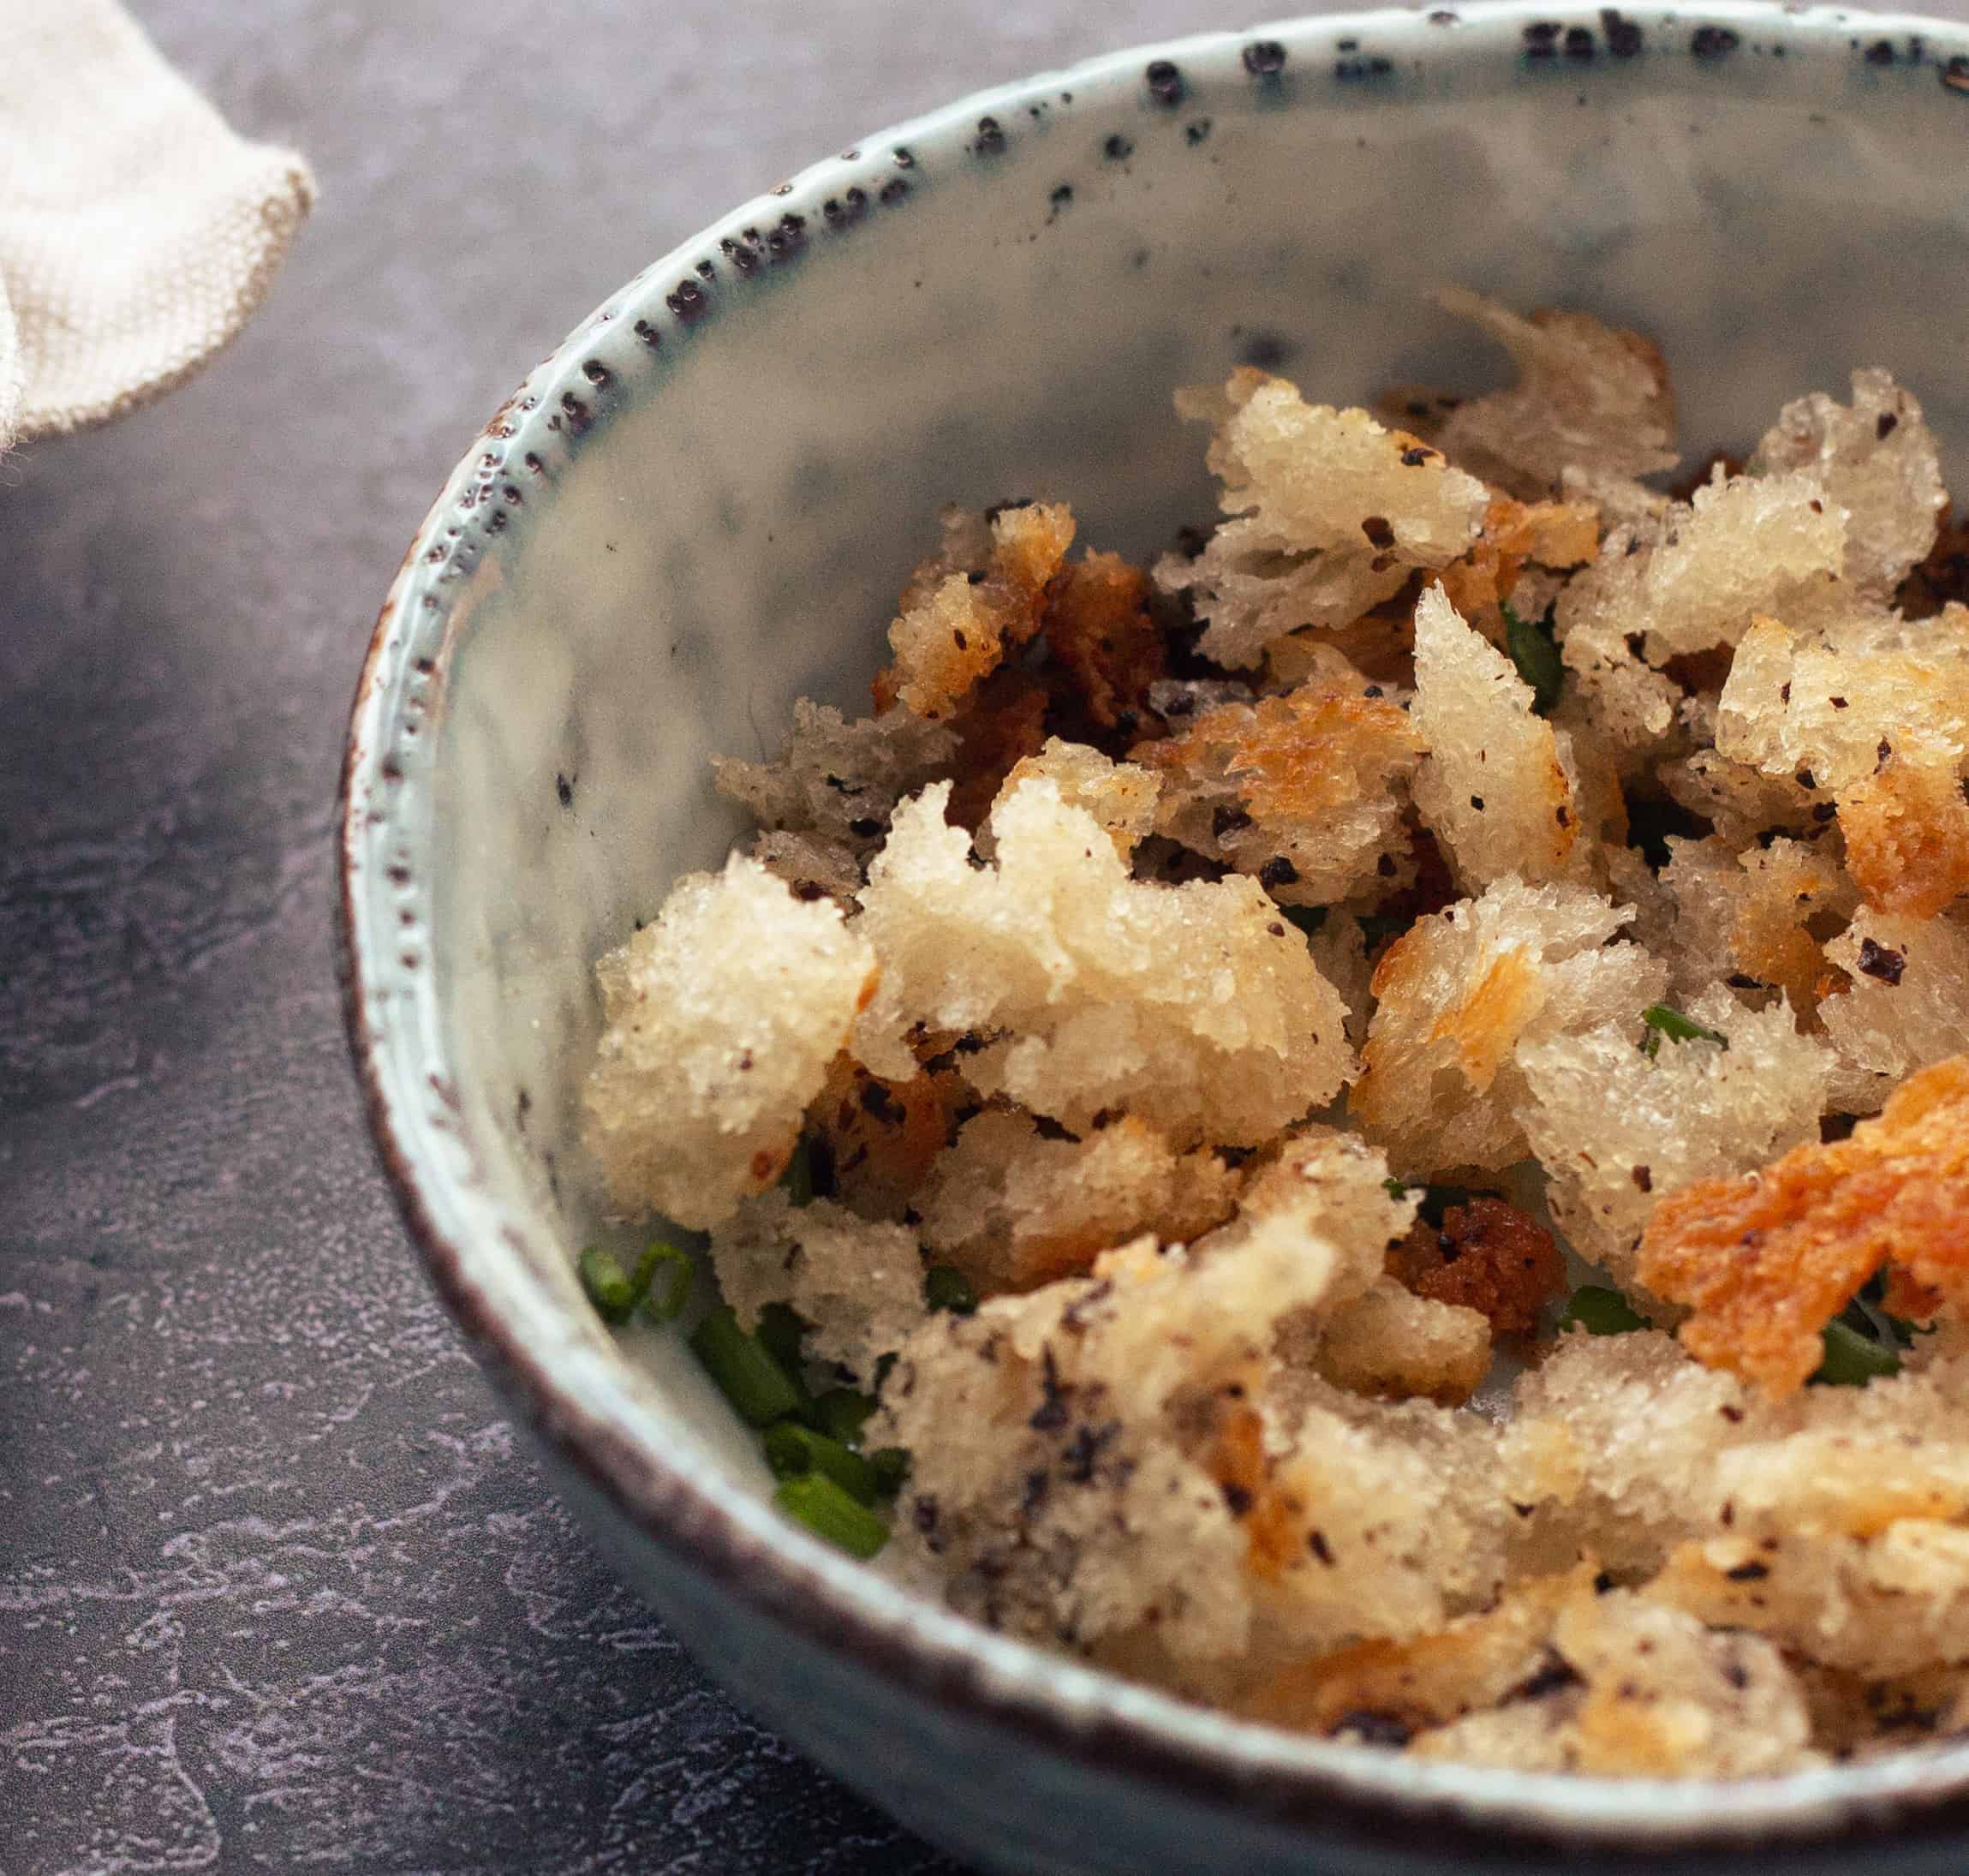 Truffled Crouton Crumbles